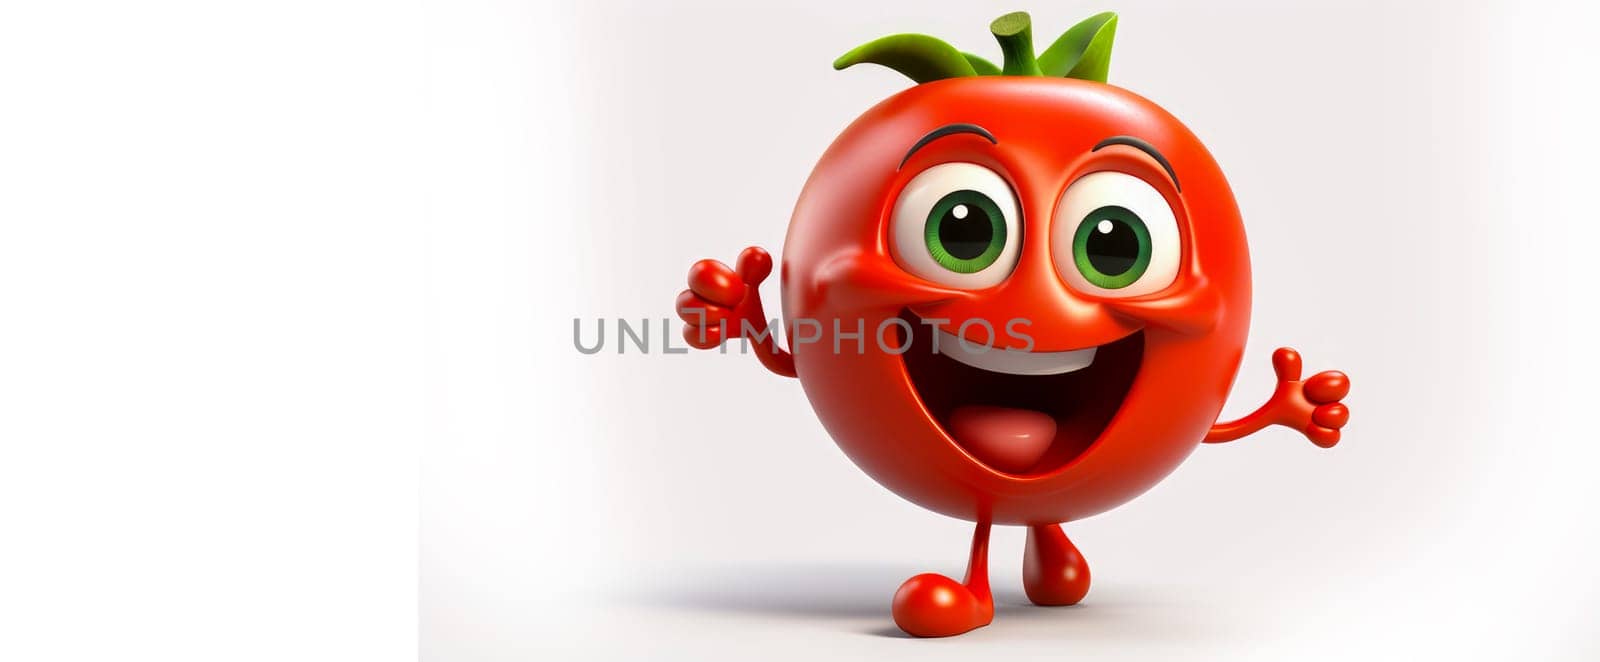 Cherry tomatoes with a cheerful face 3D on a white background. Cartoon characters, three-dimensional character, healthy lifestyle, proper nutrition, diet, fresh vegetables and fruits, vegetarianism, veganism, food, breakfast, fun, laughter, banner